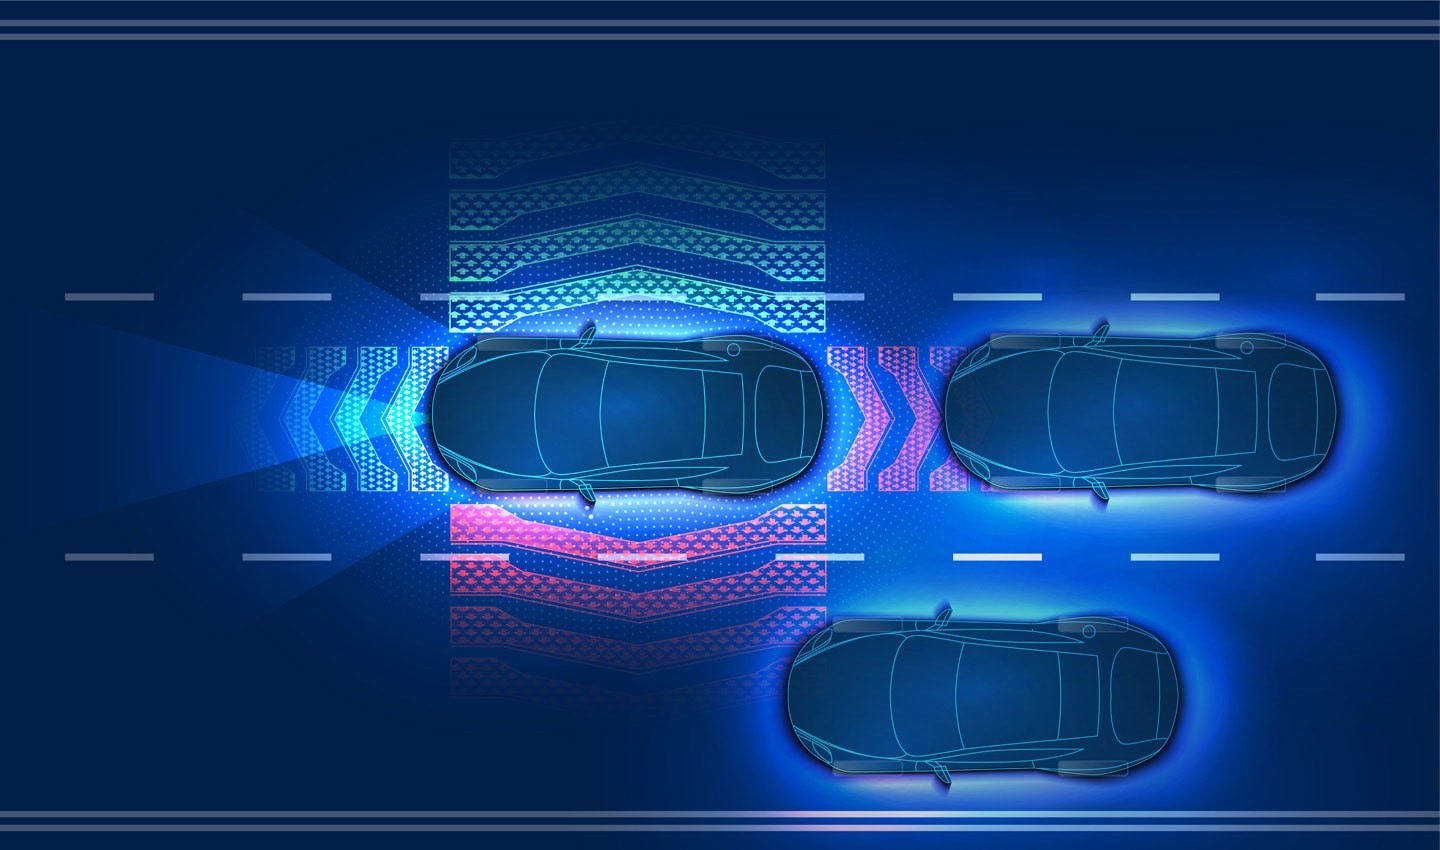 Weather conditions such as snow, rain or fog could confuse the sensors and affect the adaptive cruise control system.